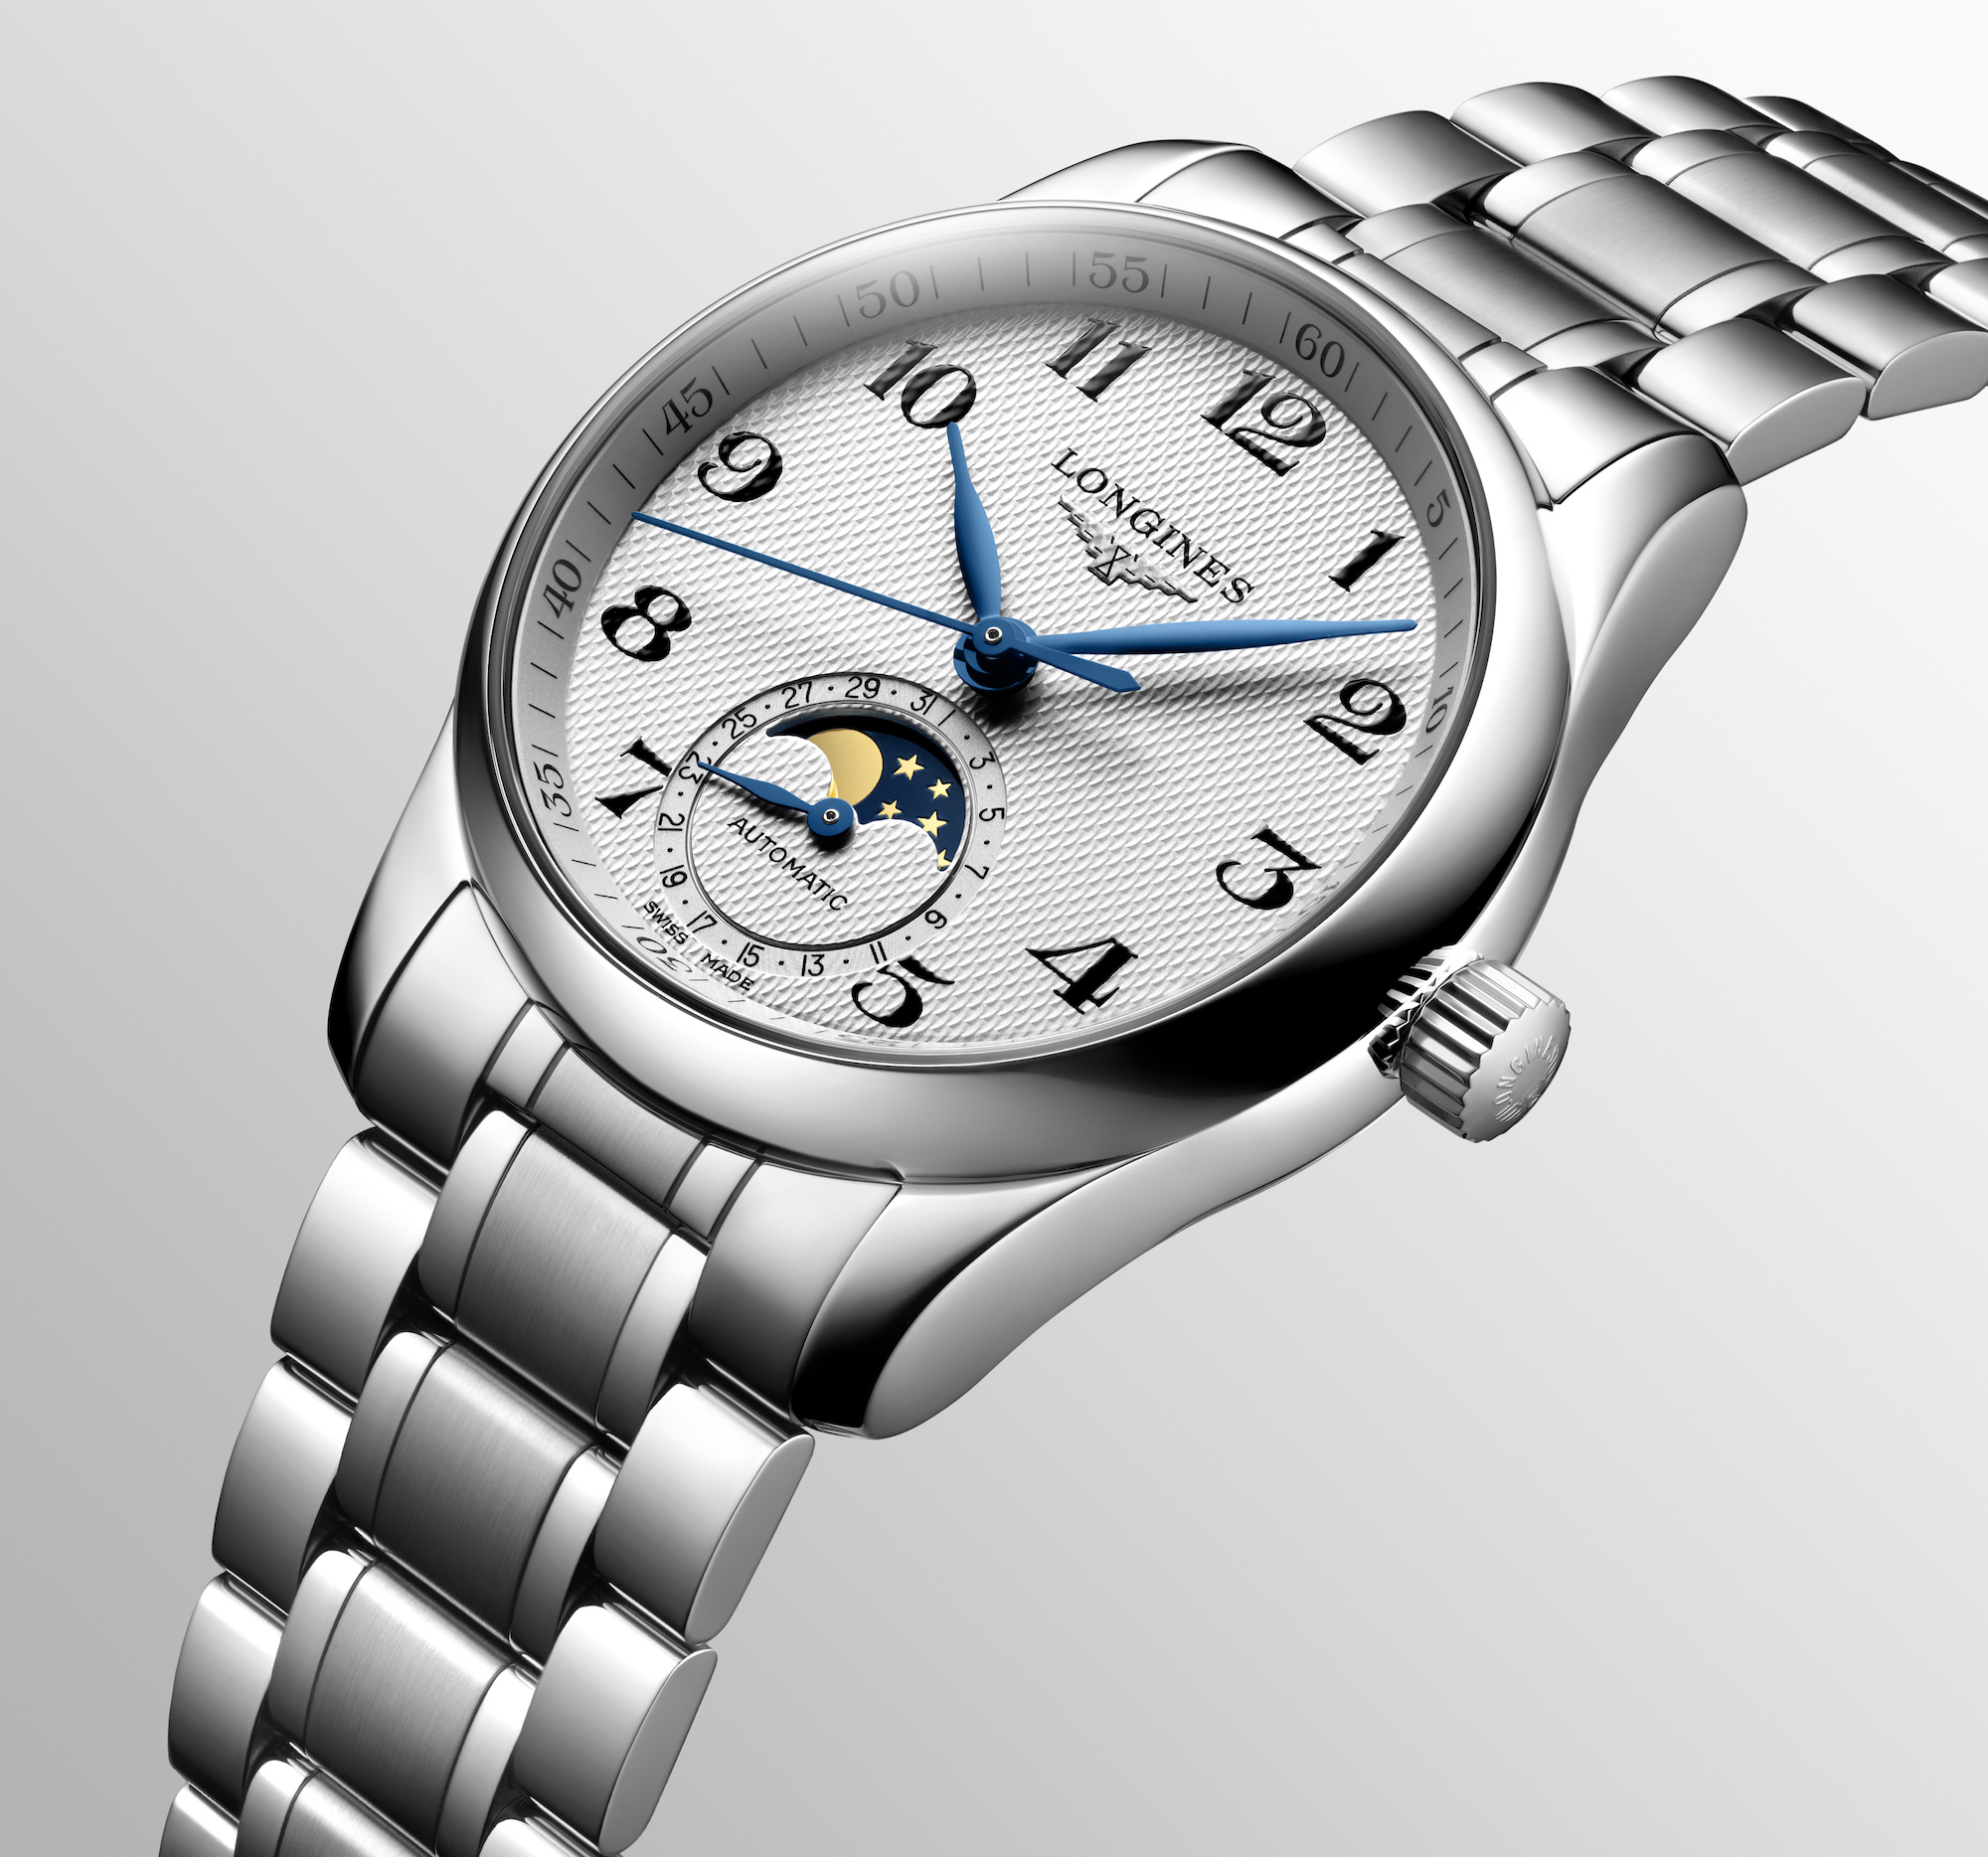 The Longines Master Collection L2.409.4.78.6 Lifestyle